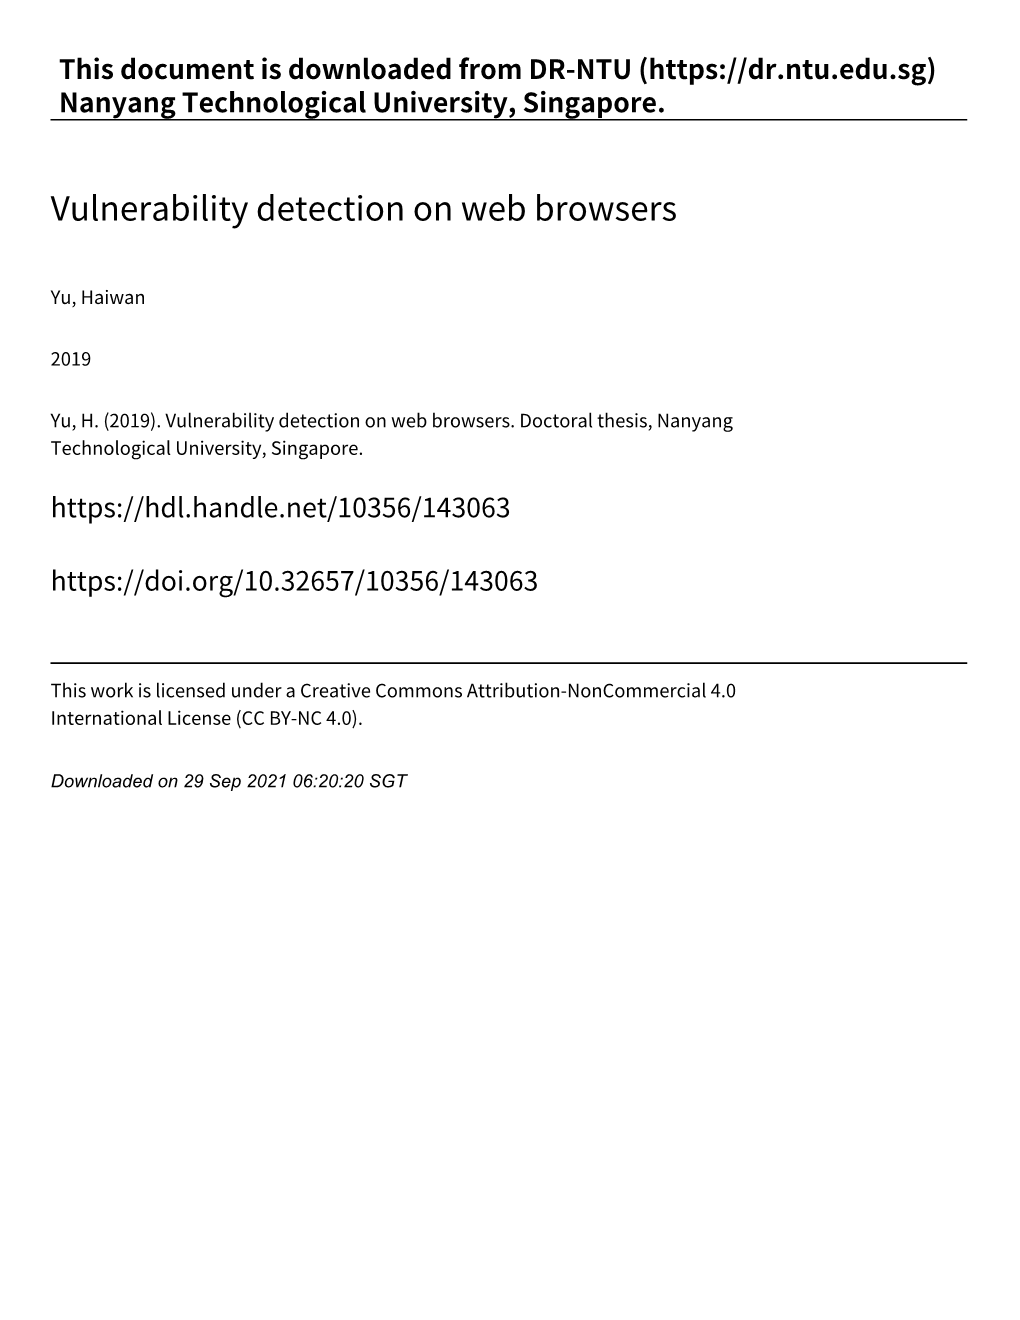 Vulnerability Detection on Web Browsers